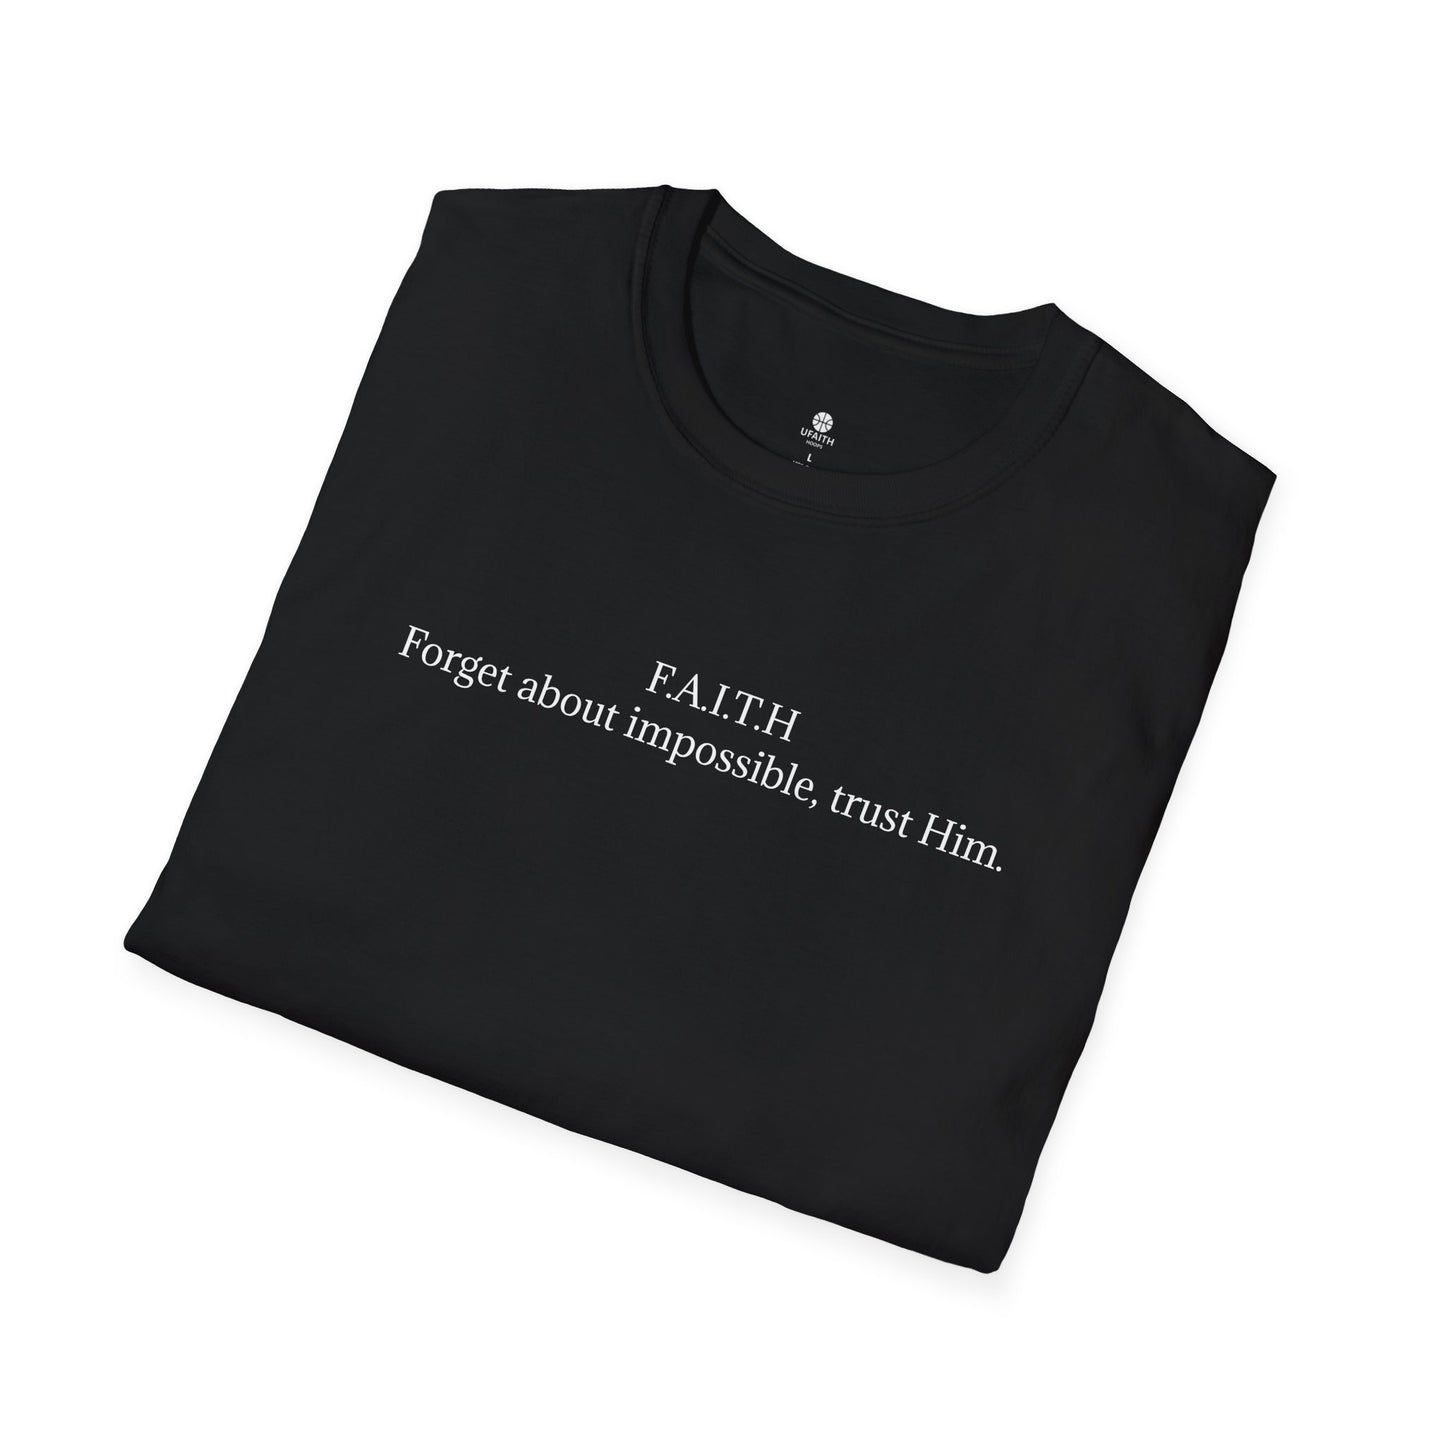 F.A.I.T.H Softstyle T-Shirt